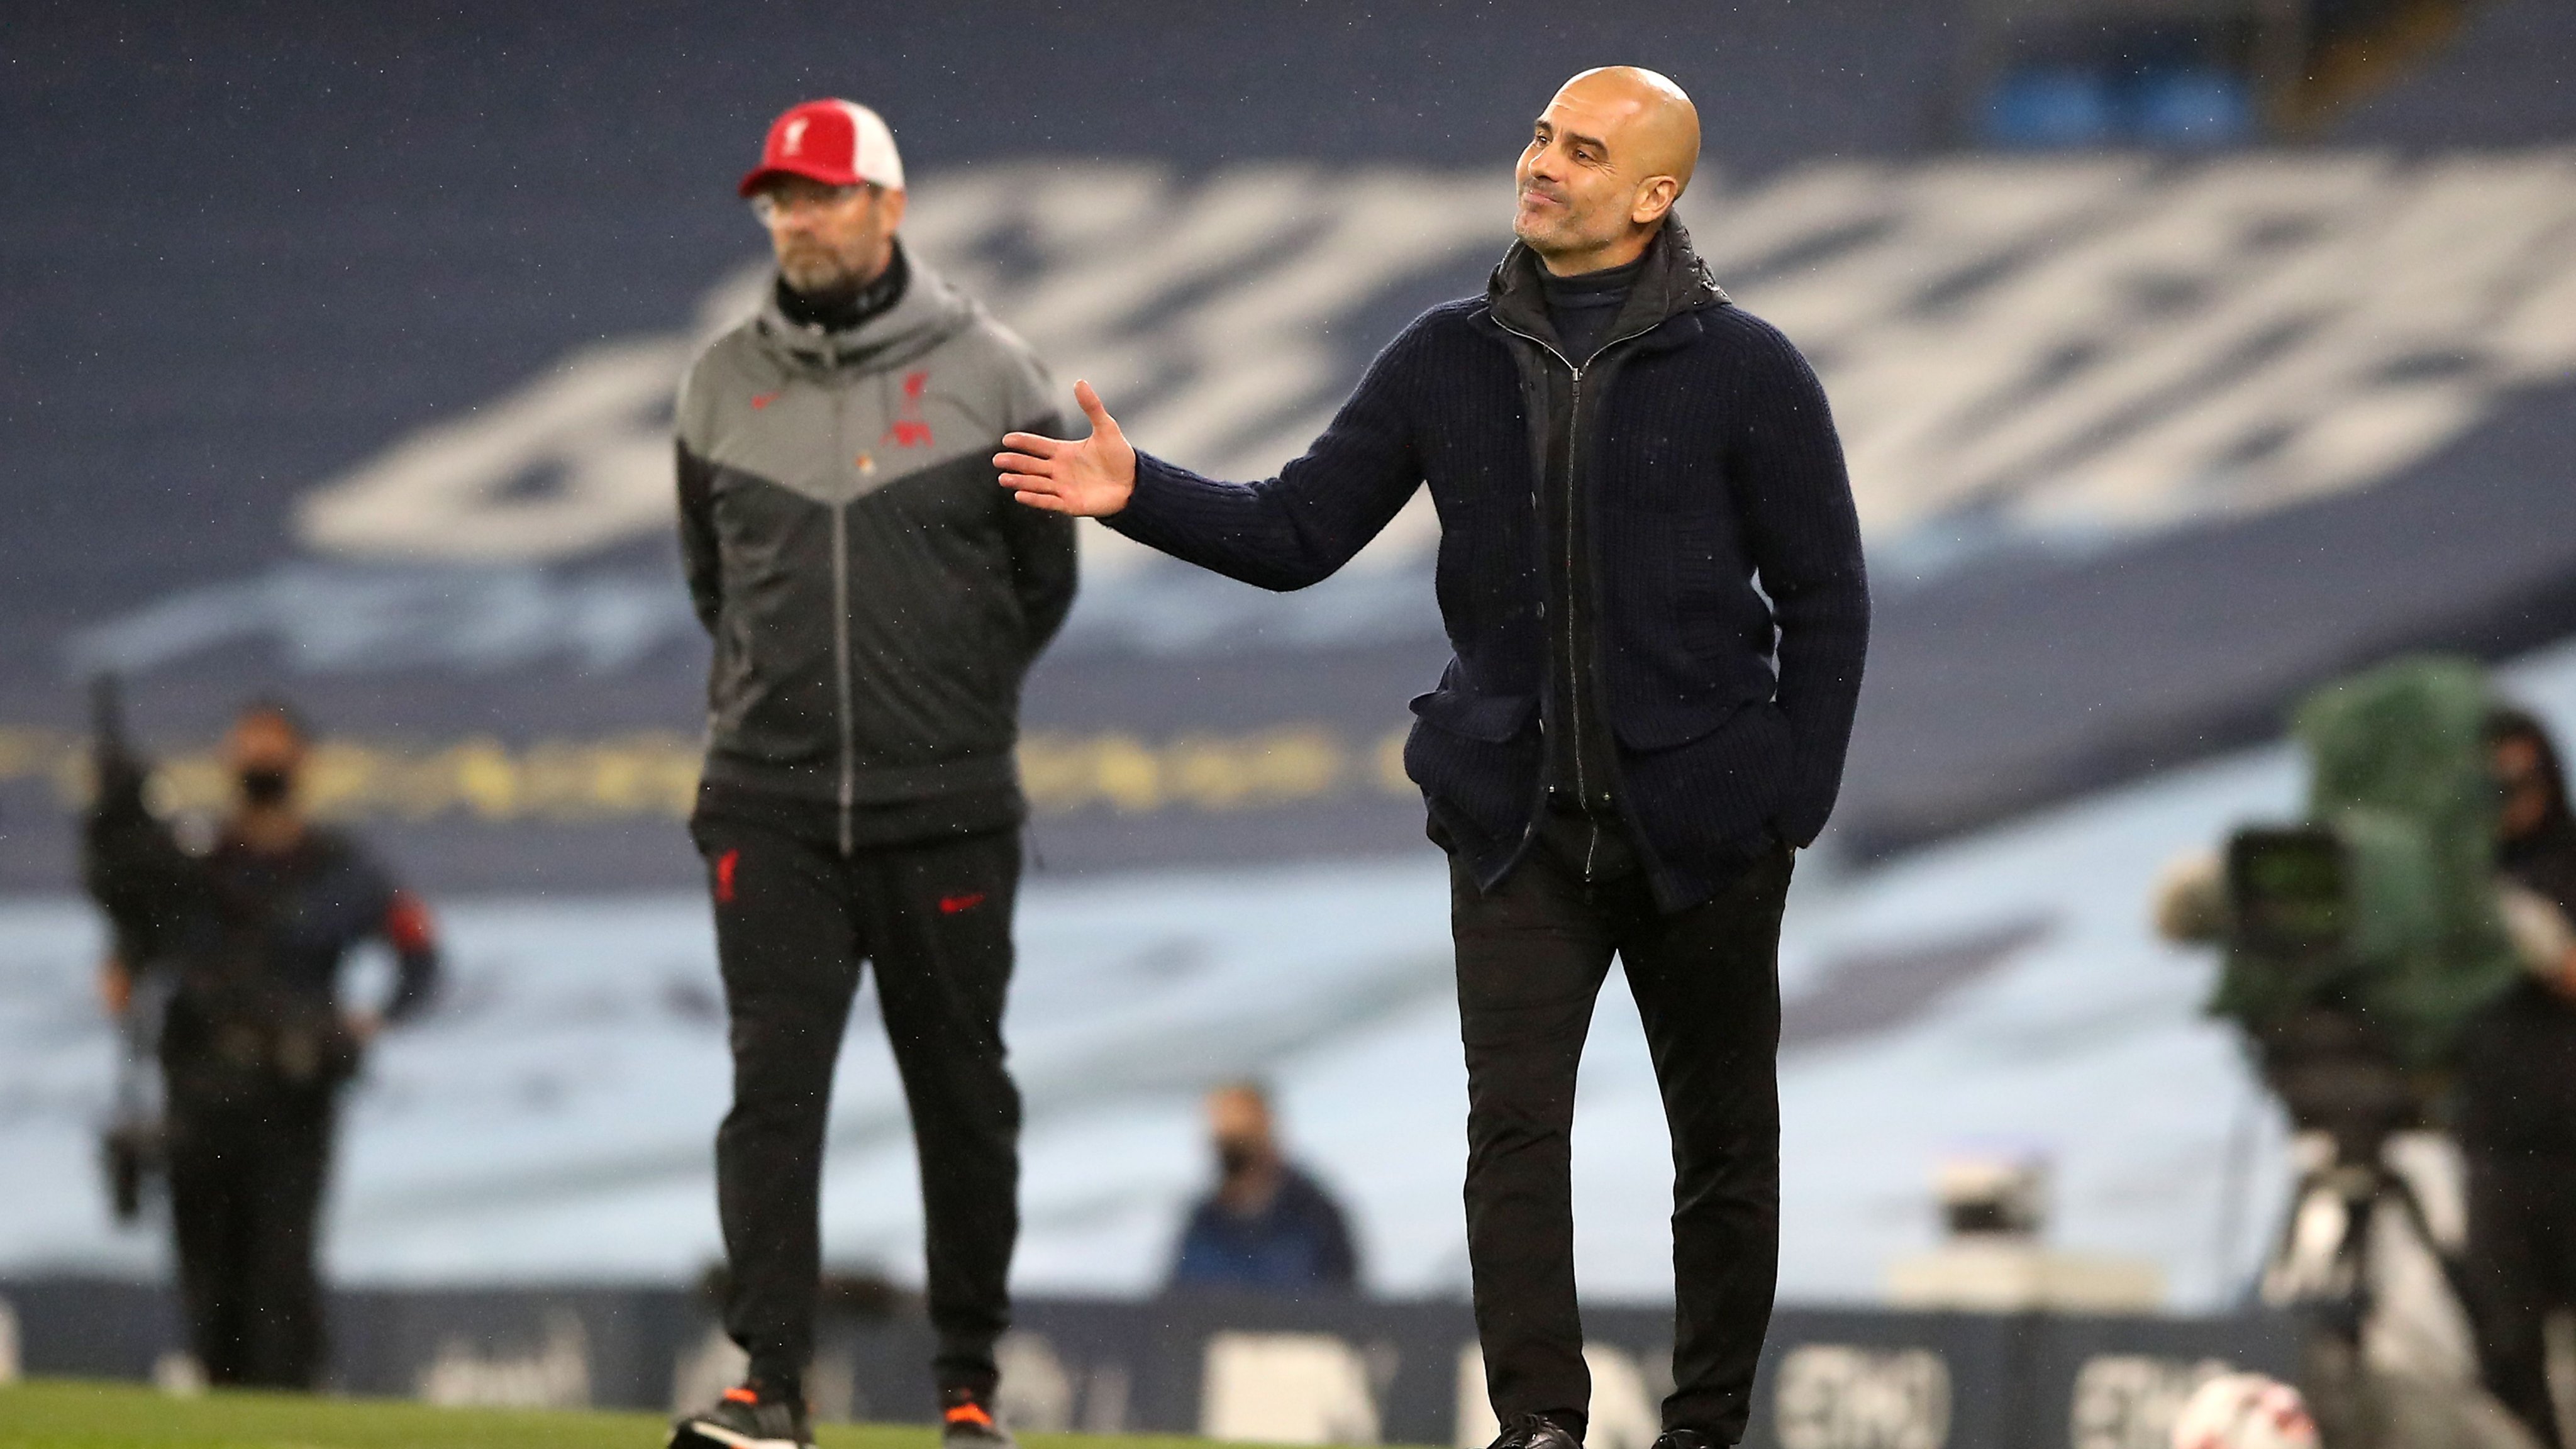 Lexica - highly detailed pep guardiola and jurgen klopp playing chess  gracefully